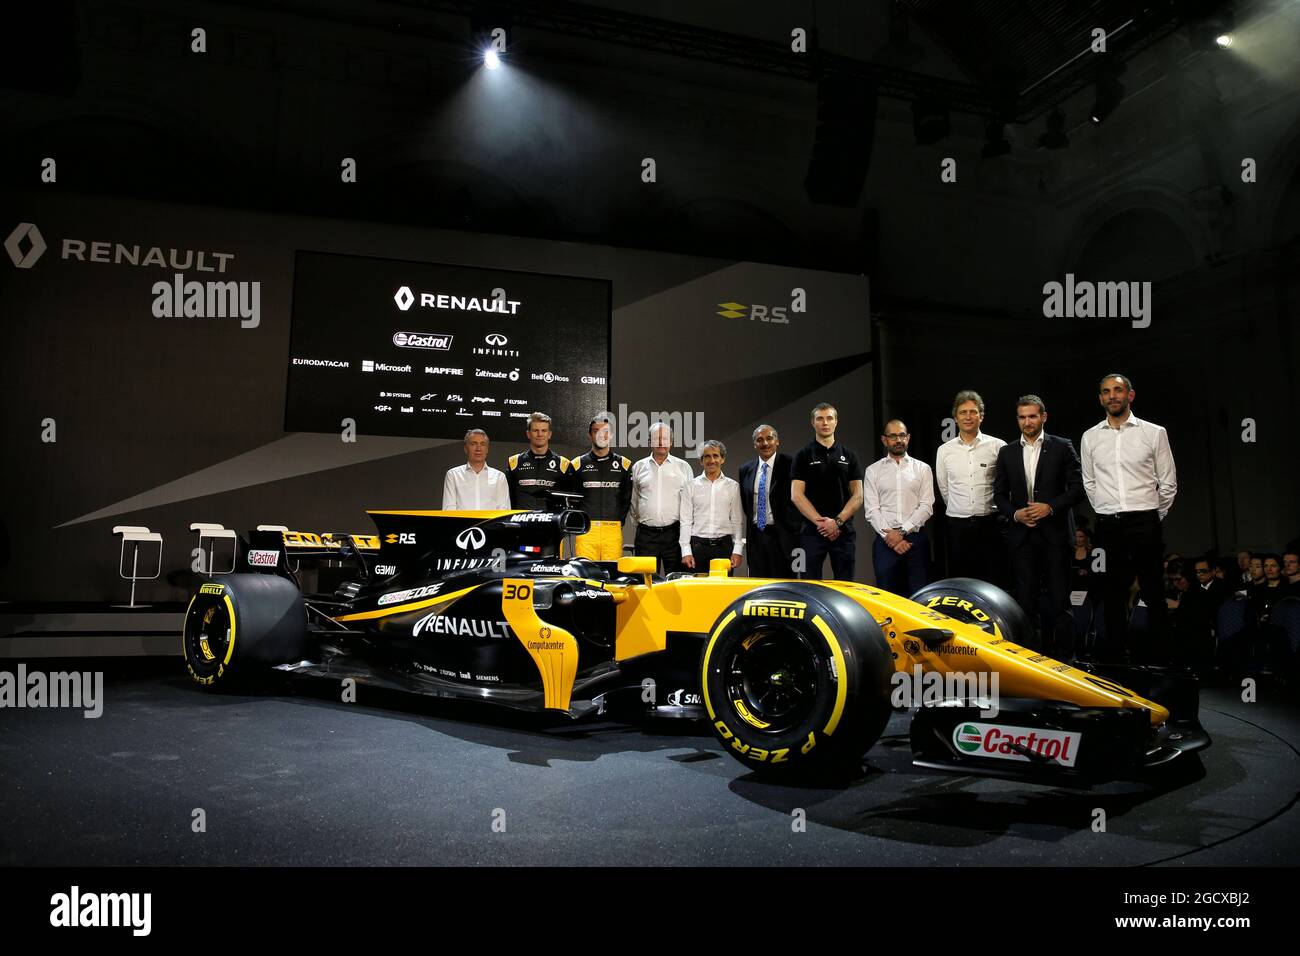 (L to R): Bob Bell (GBR) Renault Sport F1 Team Chief Technical Officer; Nico Hulkenberg (GER) Renault Sport F1 Team; Jolyon Palmer (GBR) Renault Sport F1 Team; Jerome Stoll (FRA) Renault Sport F1 President; Alain Prost (FRA); Mandhir Singh, Castol COO; Sergey Sirotkin (RUS) Renault Sport F1 Team Third Driver; Thierry Koskas, Renault Executive Vice President of Sales and Marketing; Pepijn Richter, Microsoft Director of Product Marketing; Tommaso Volpe, Infiniti Global Director of Motorsport; Cyril Abiteboul (FRA) Renault Sport F1 Managing Director, with the Renault Sport F1 Team RS17. Renault Stock Photo